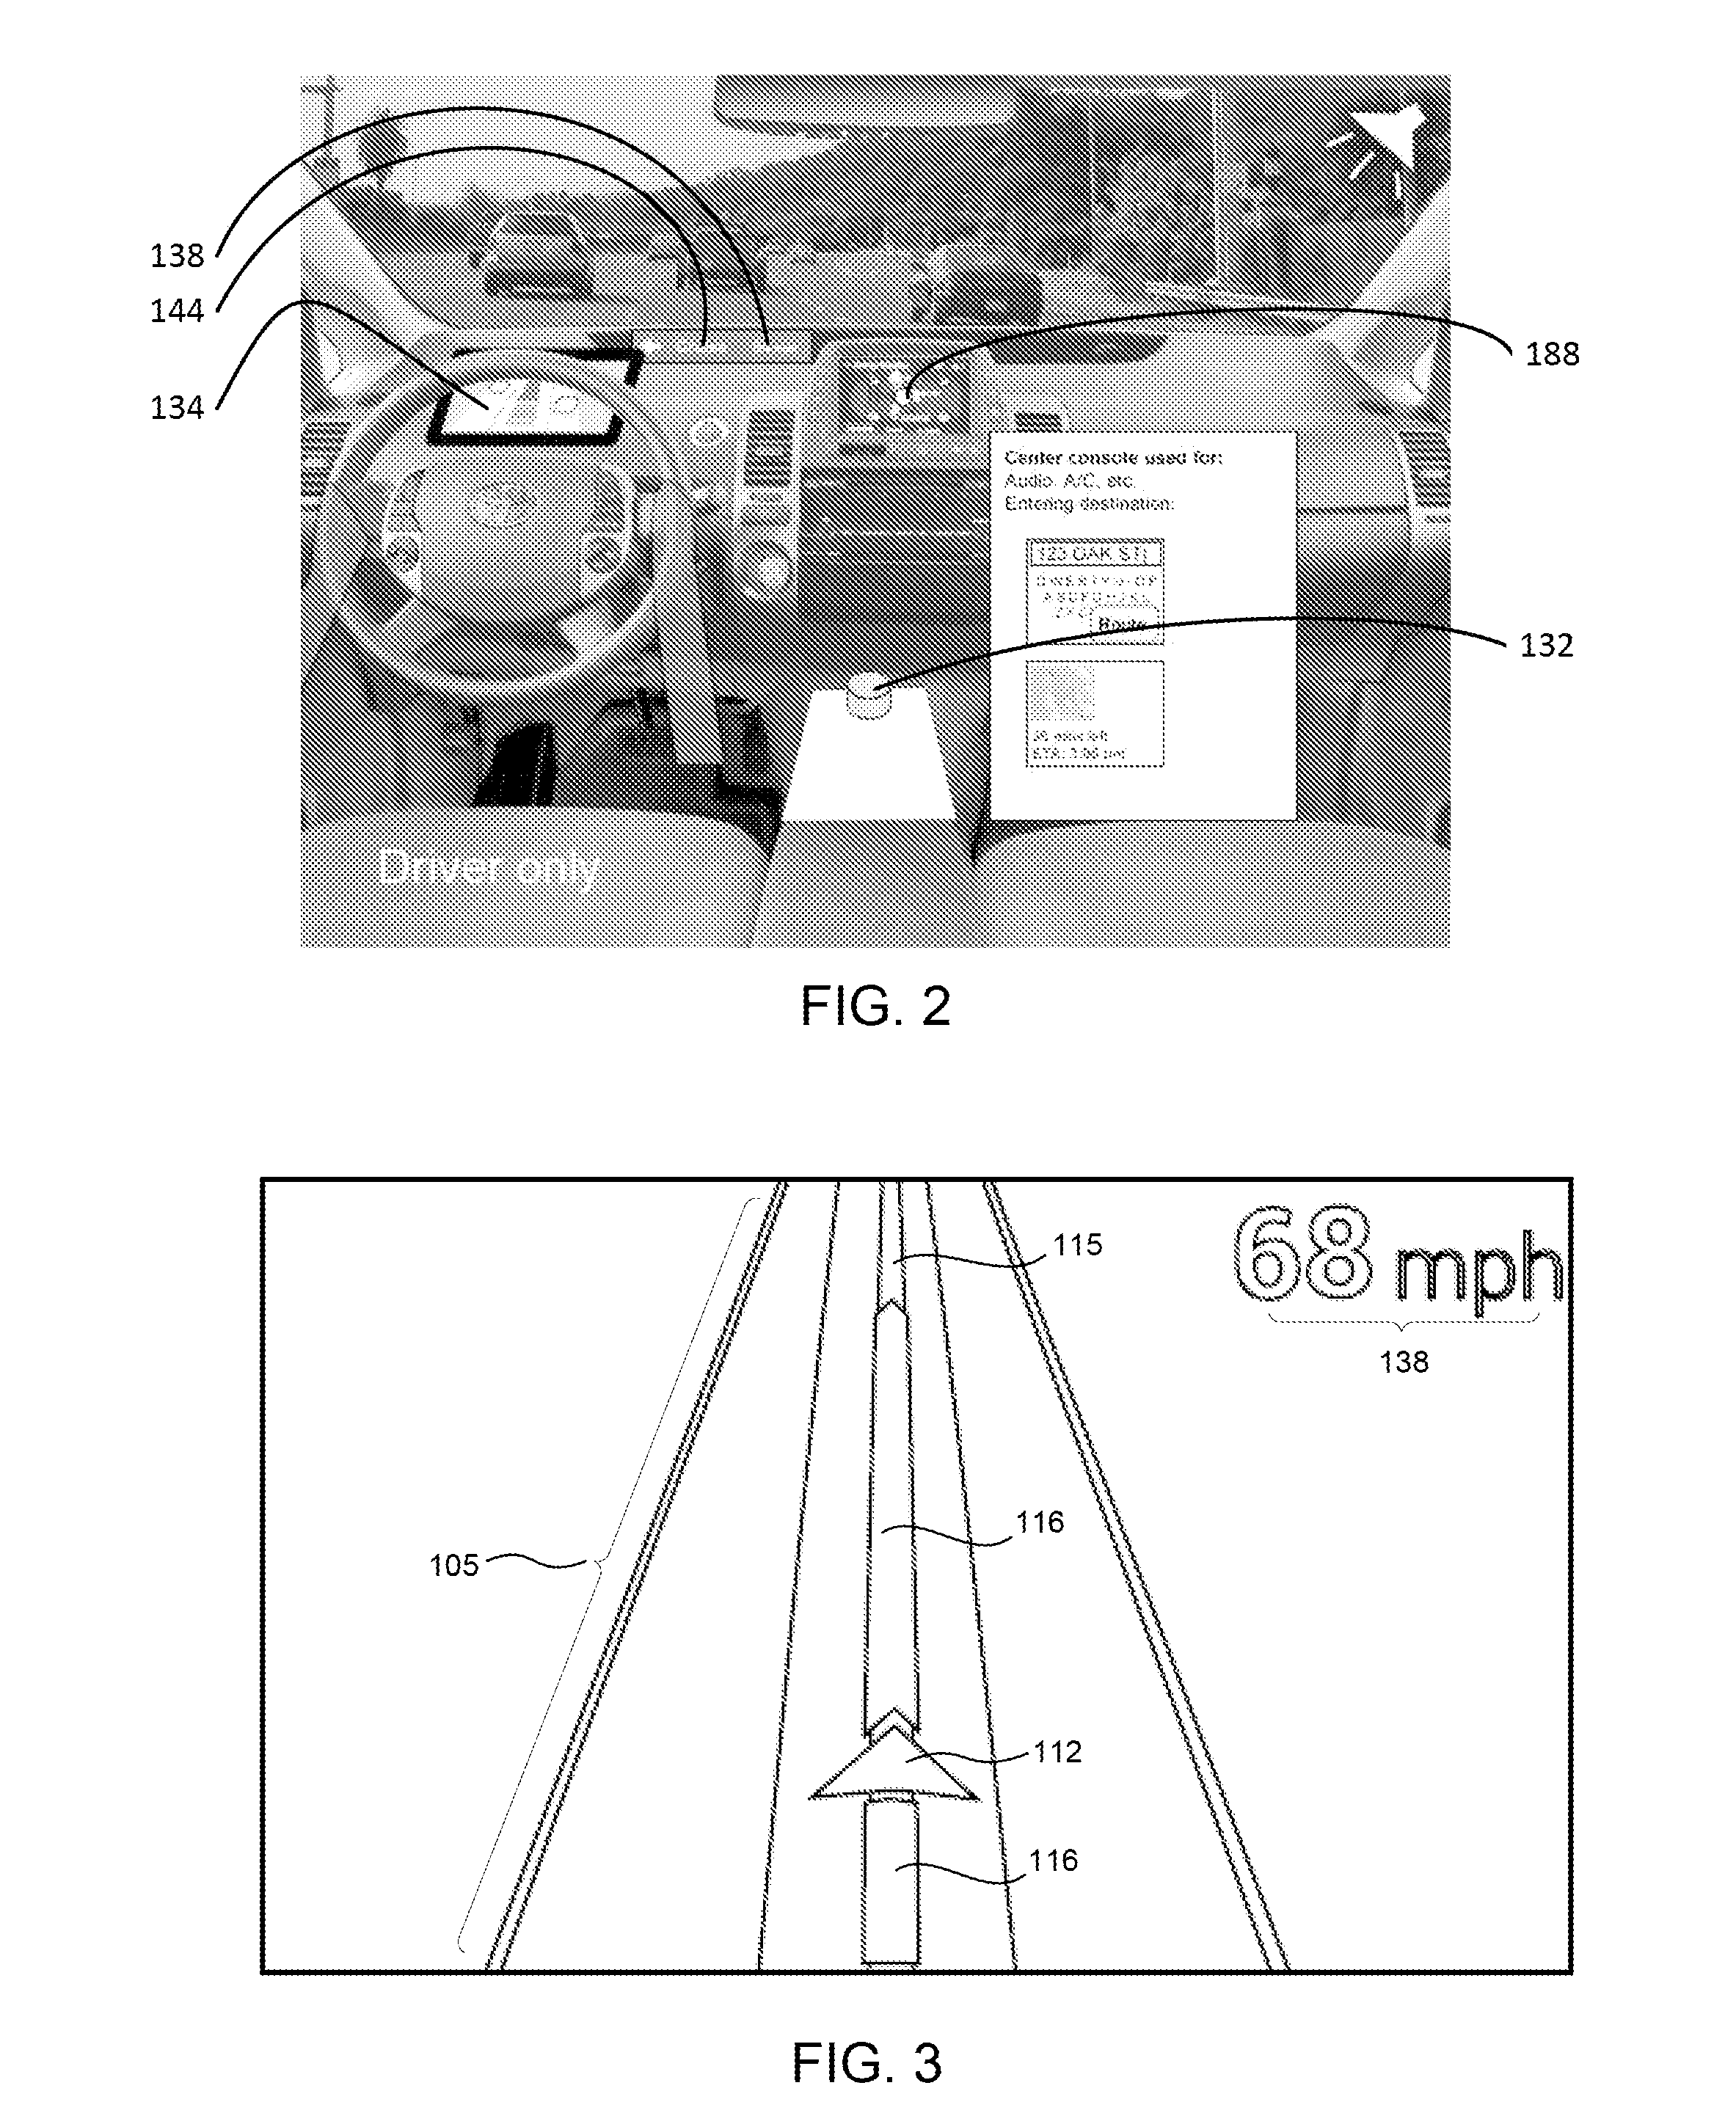 User interface for displaying object-based indications in an autonomous driving system